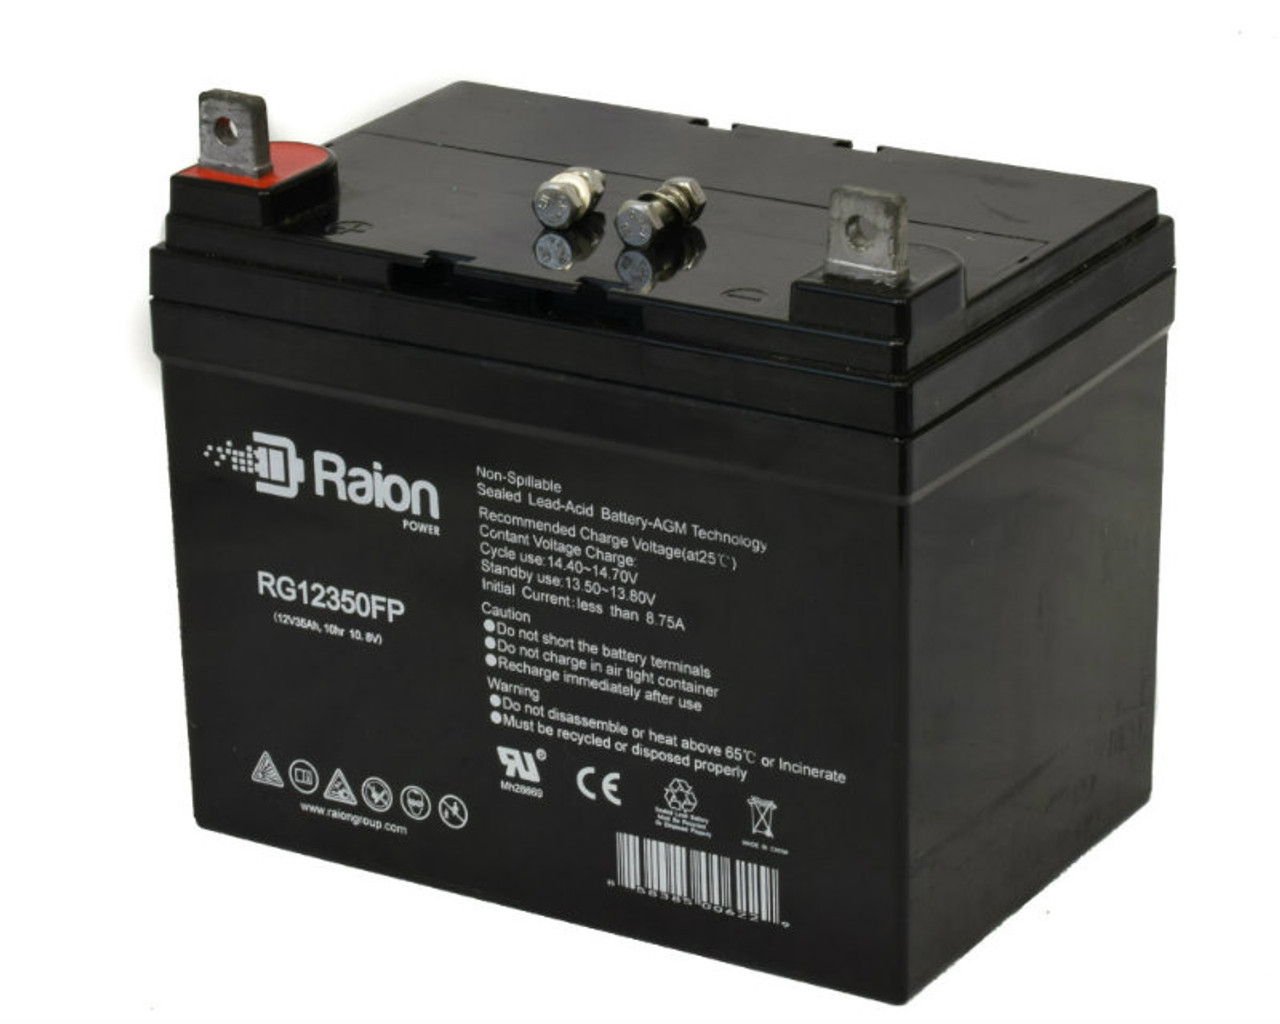 Raion Power Replacement 12V 35Ah RG12350FP Battery for J.I. Case & Case IH 116XC